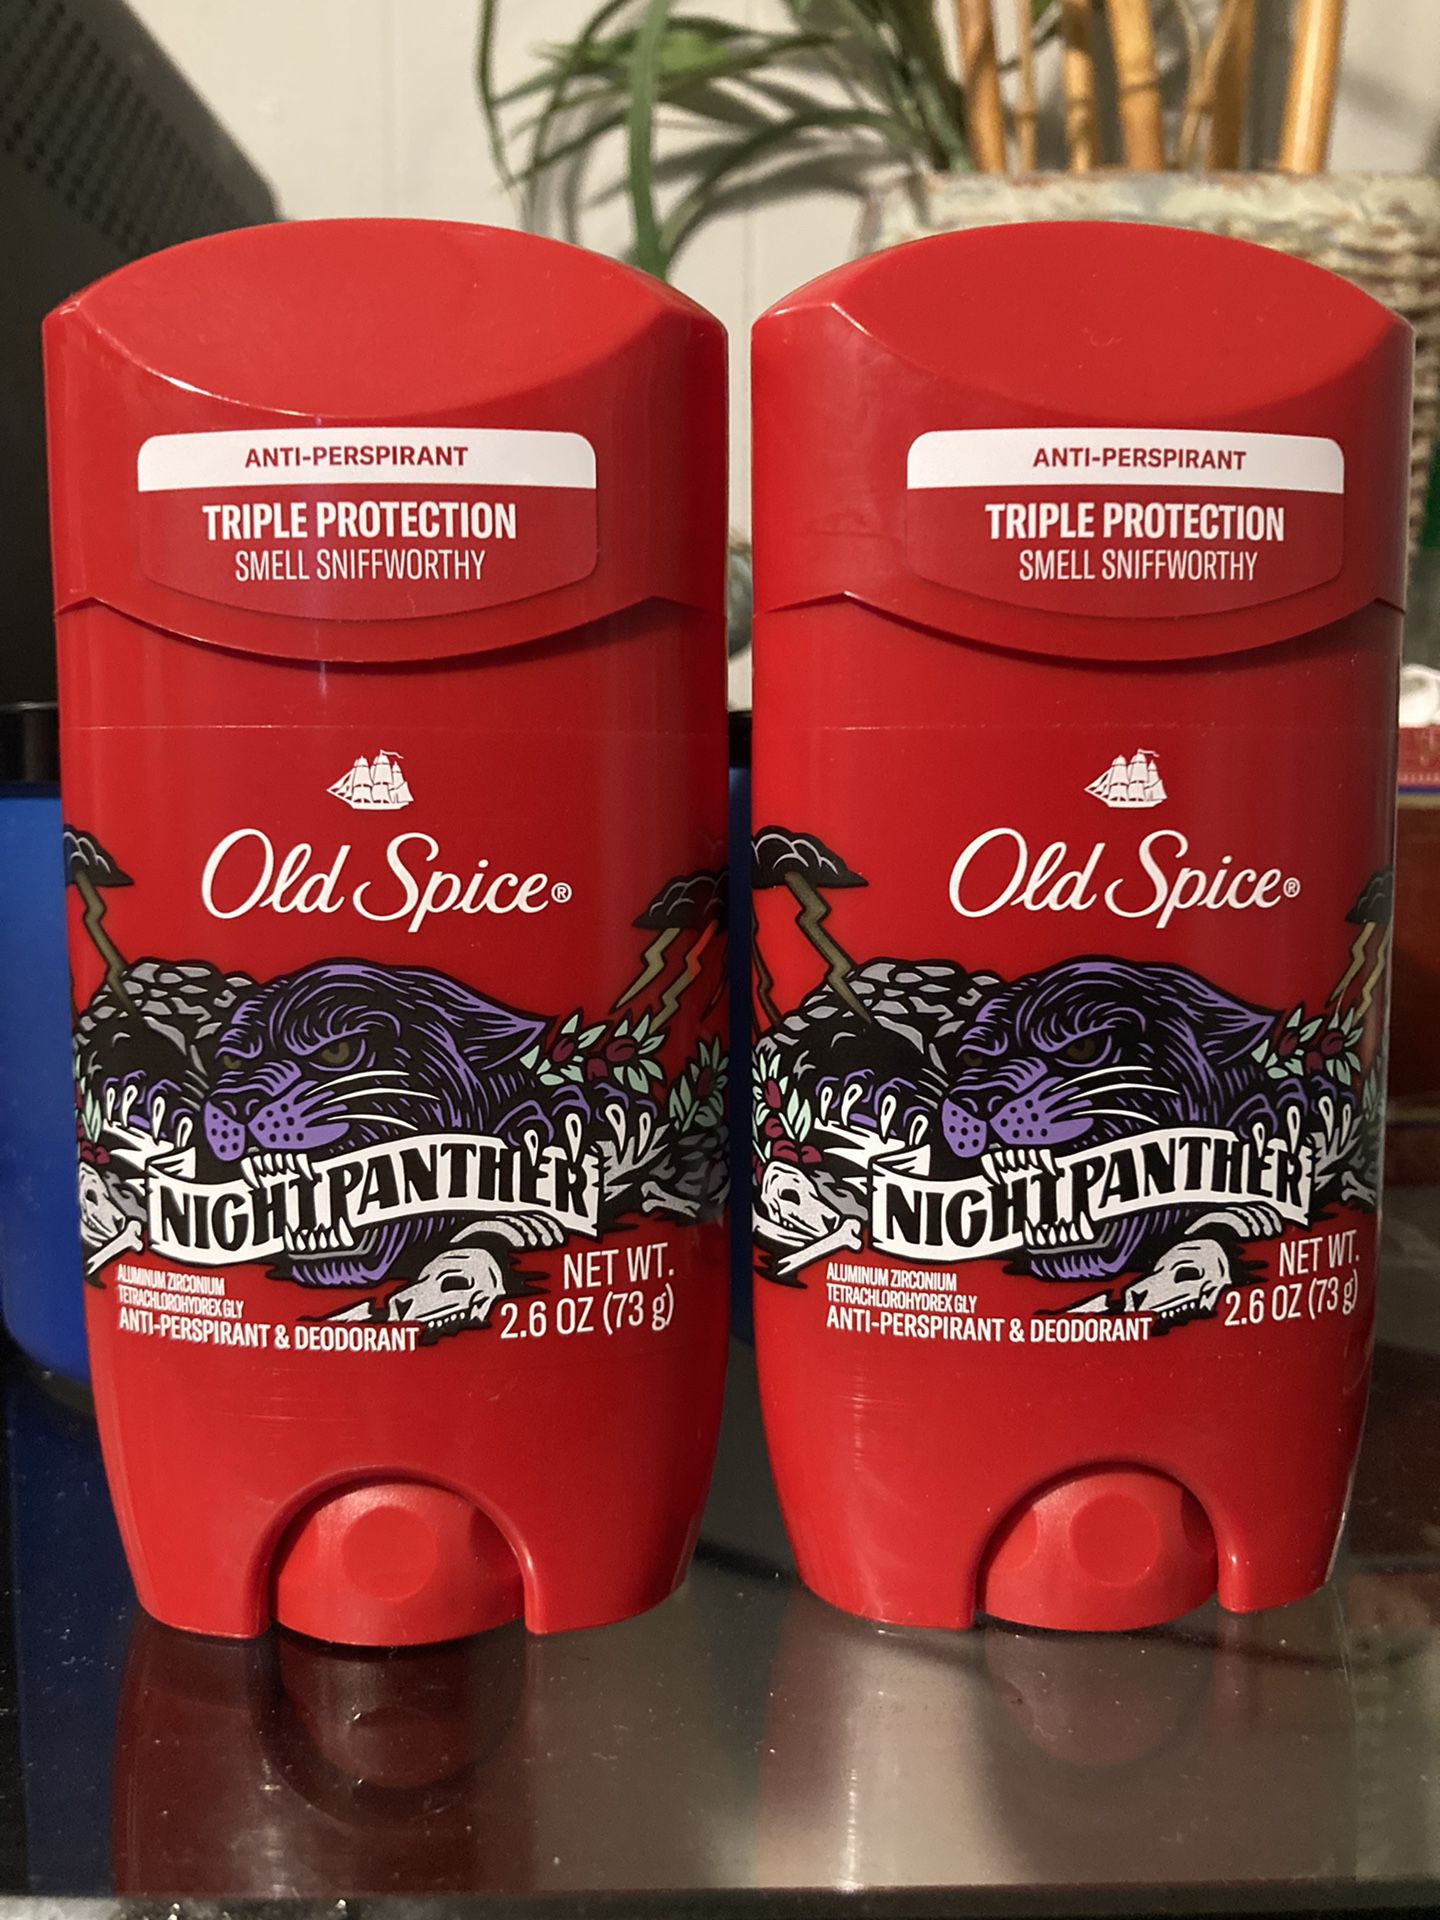 Old Spice Night Panther anti-perspirant deodorant